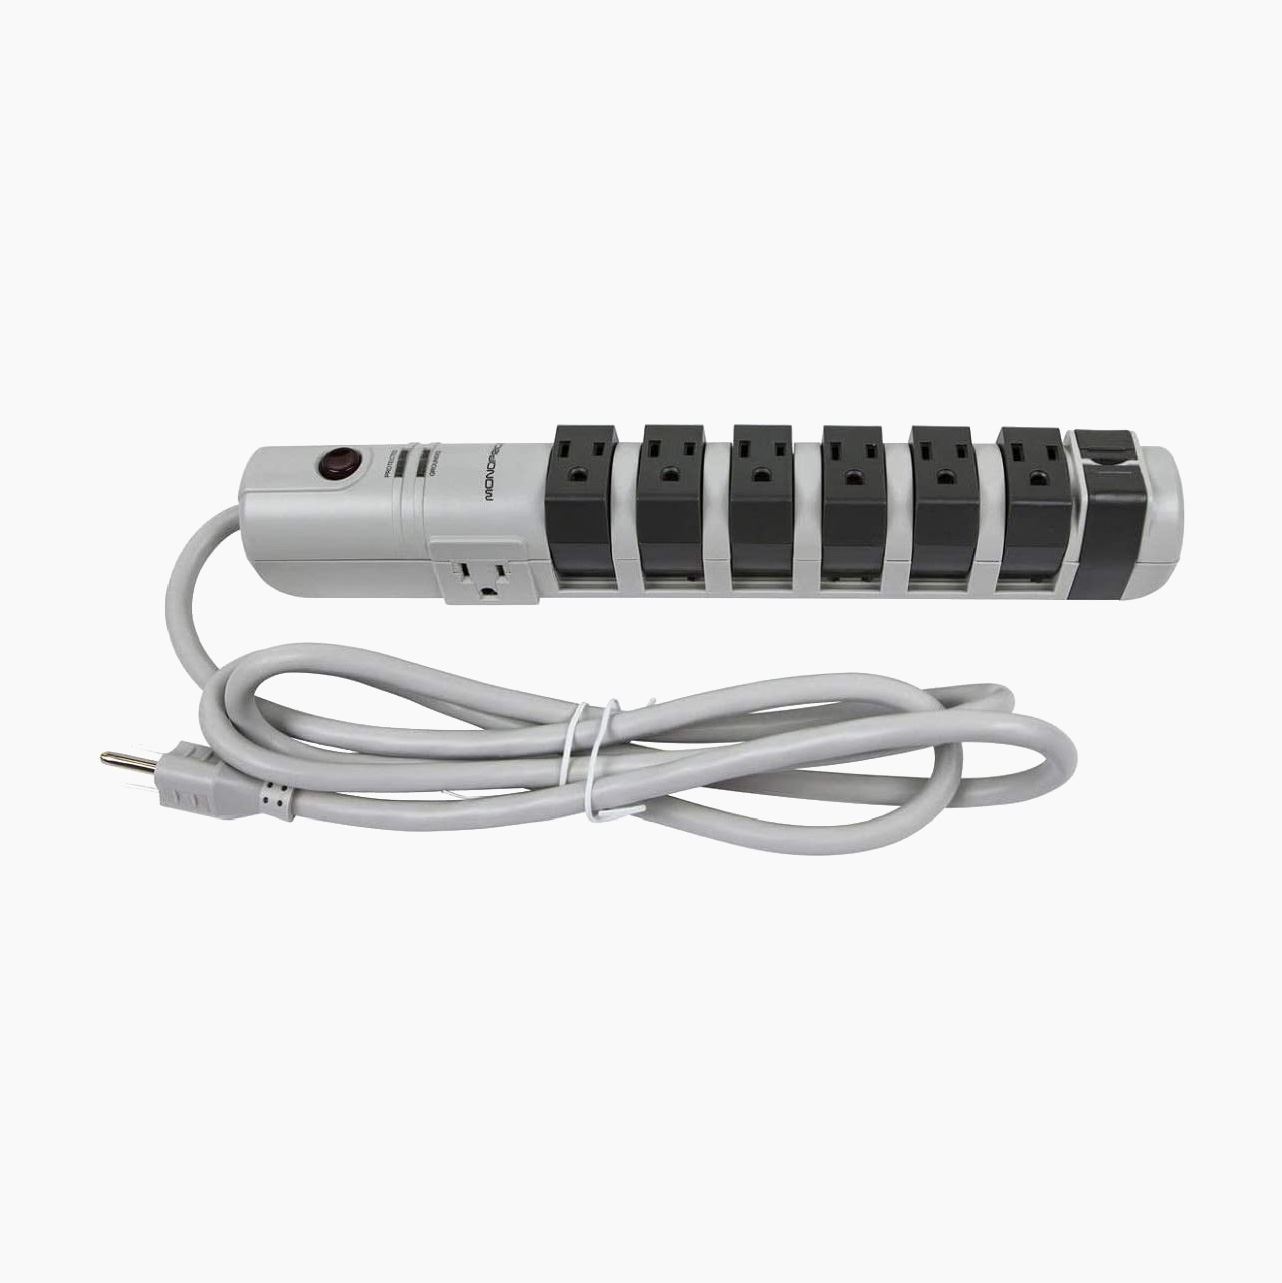 HGG22 Work From Home Monoprice Surge Strip